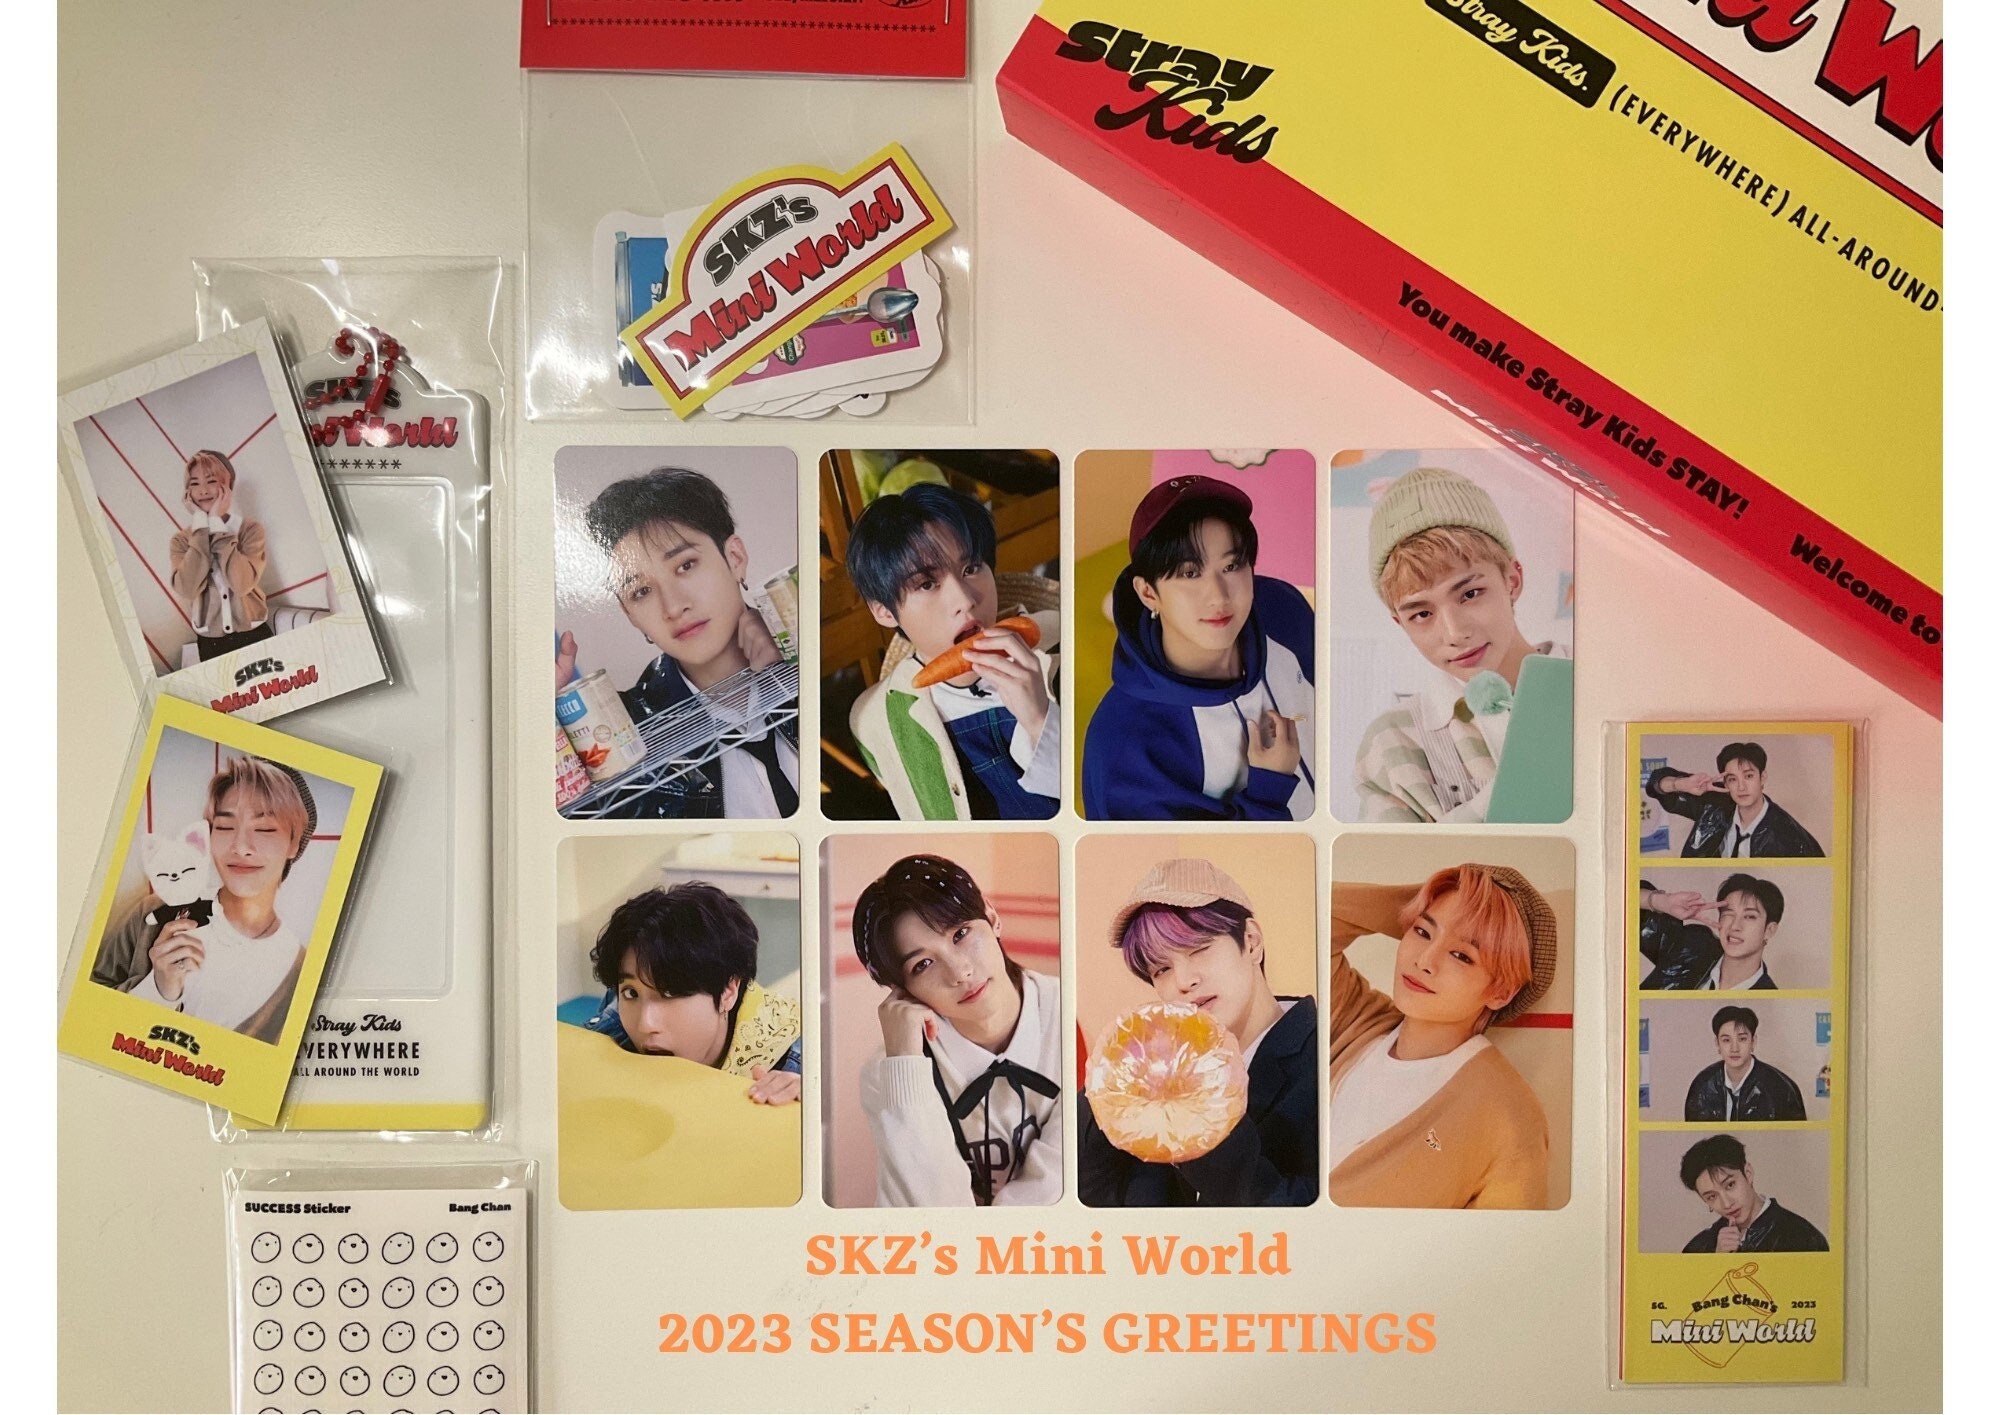 Stray Kids Welcomes You to Their 'Mini World' in 2023 Seasons Greetings  Teaser Images